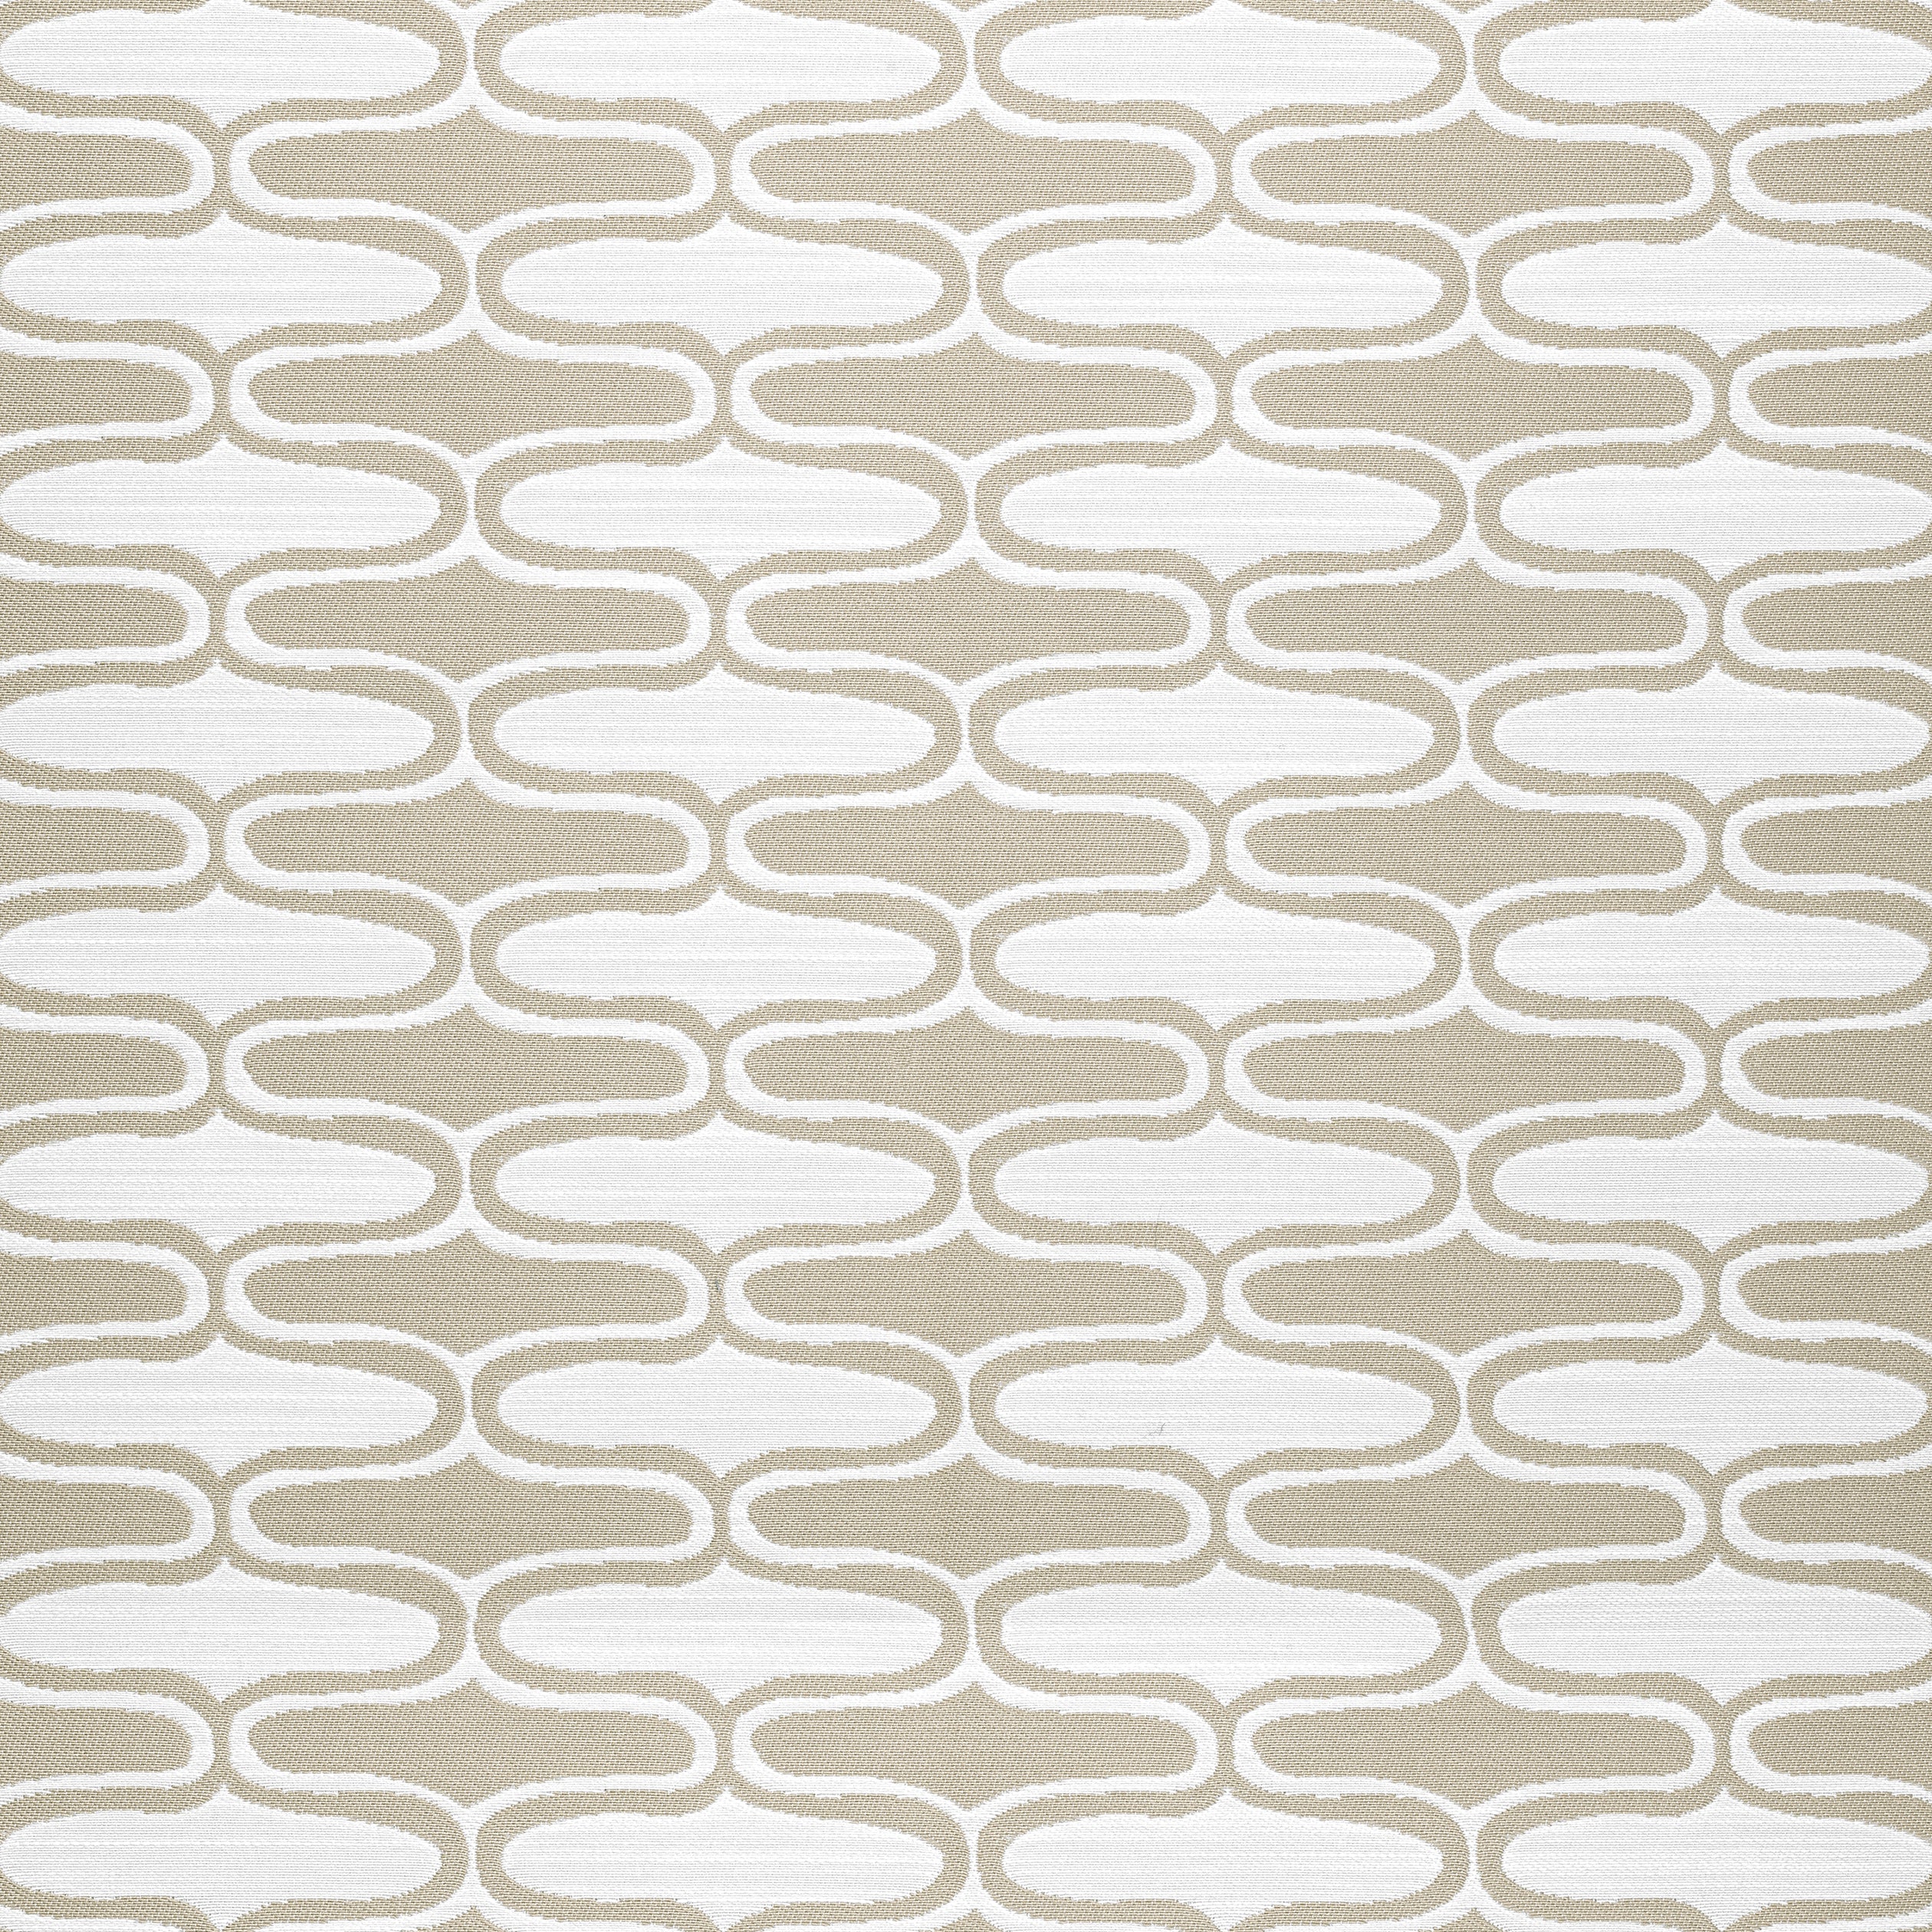 Saraband fabric in sand color - pattern number W8524 - by Thibaut in the Villa collection